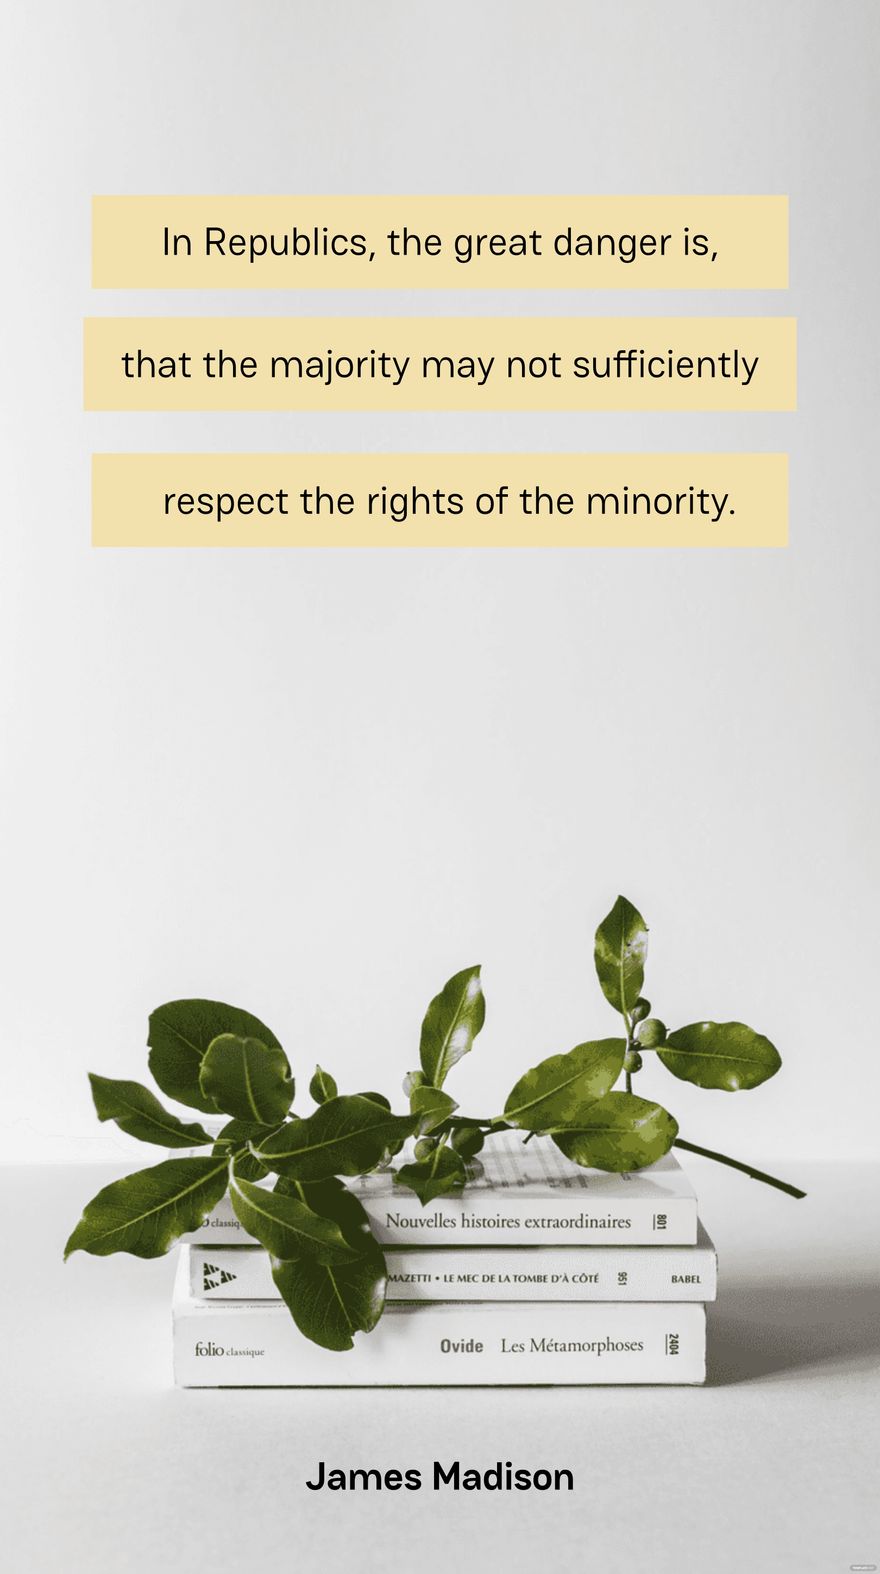 In Republics, the great danger is, that the majority may not sufficiently respect the rights of the minority. - James Madison in JPEG